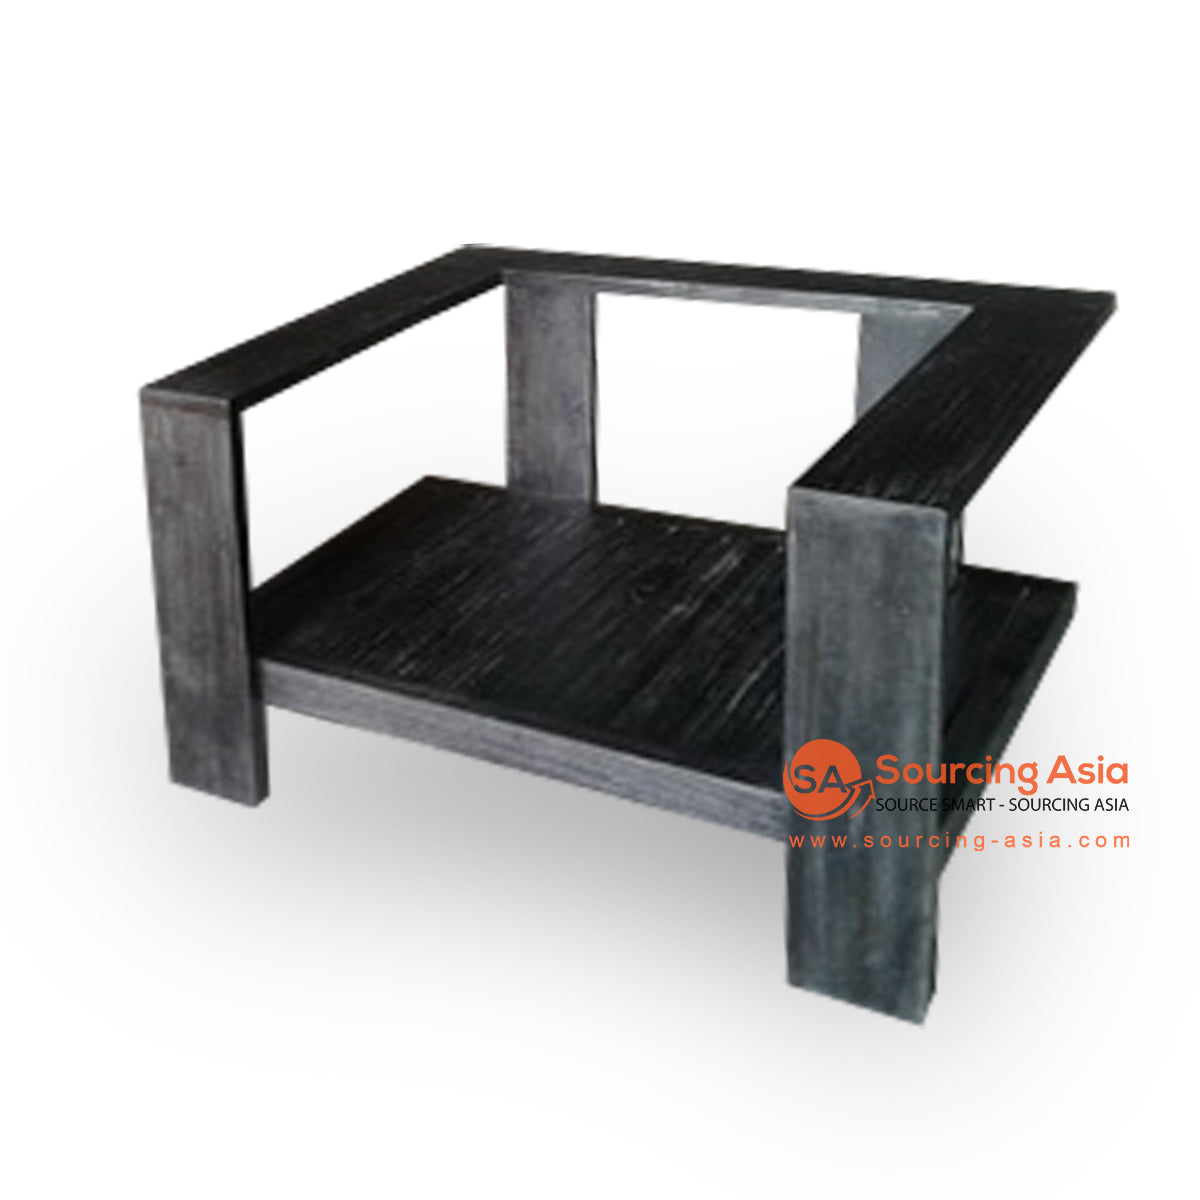 ECL062 BLACK RECYCLED TEAK WOOD SINGLE CHAIR FRAME (PRICE WITHOUT CUSHION)